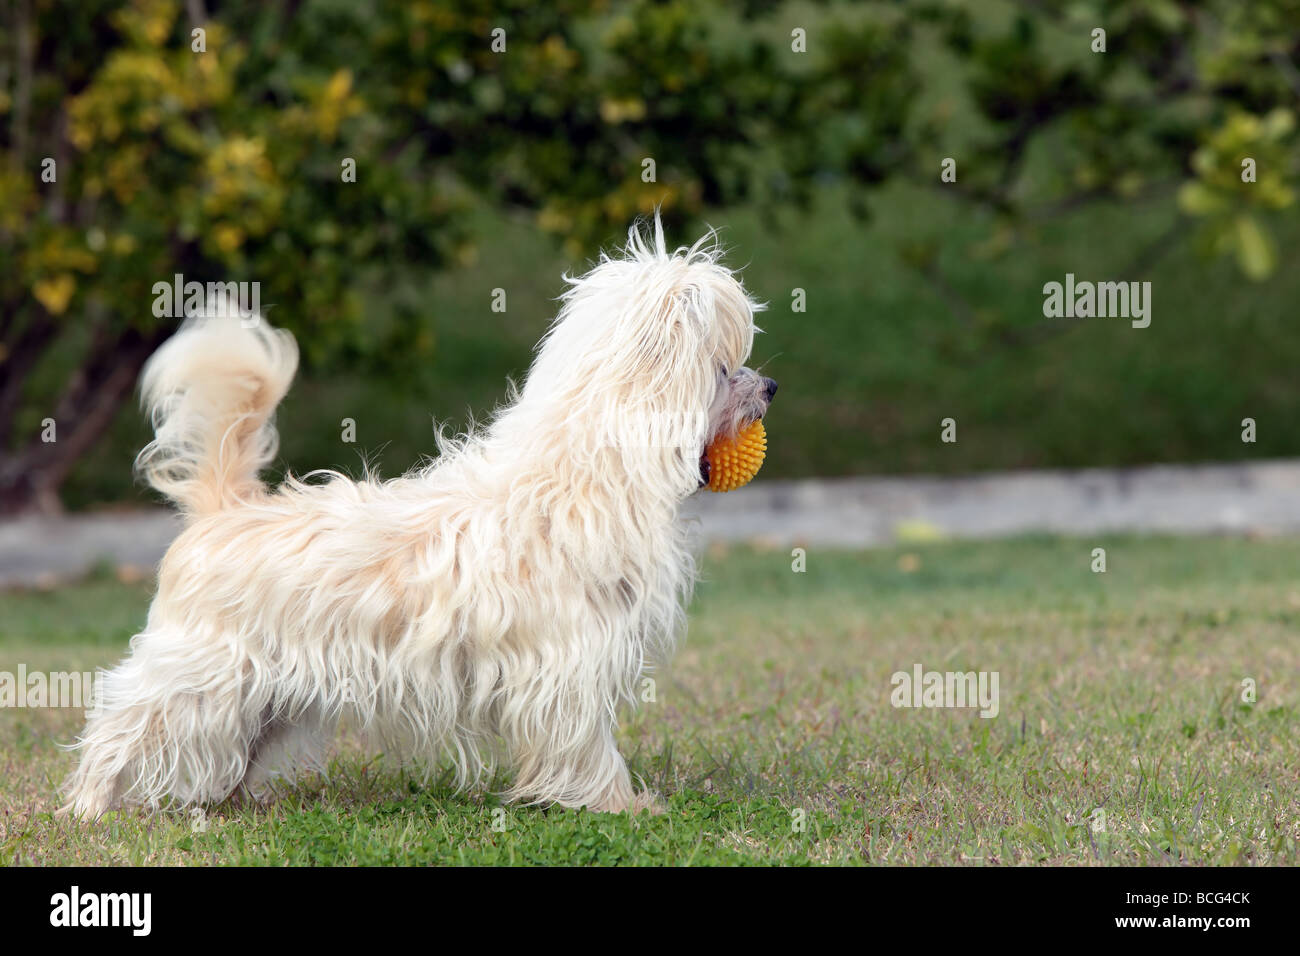 small Australian silky terrier dog with a ball at play Stock Photo